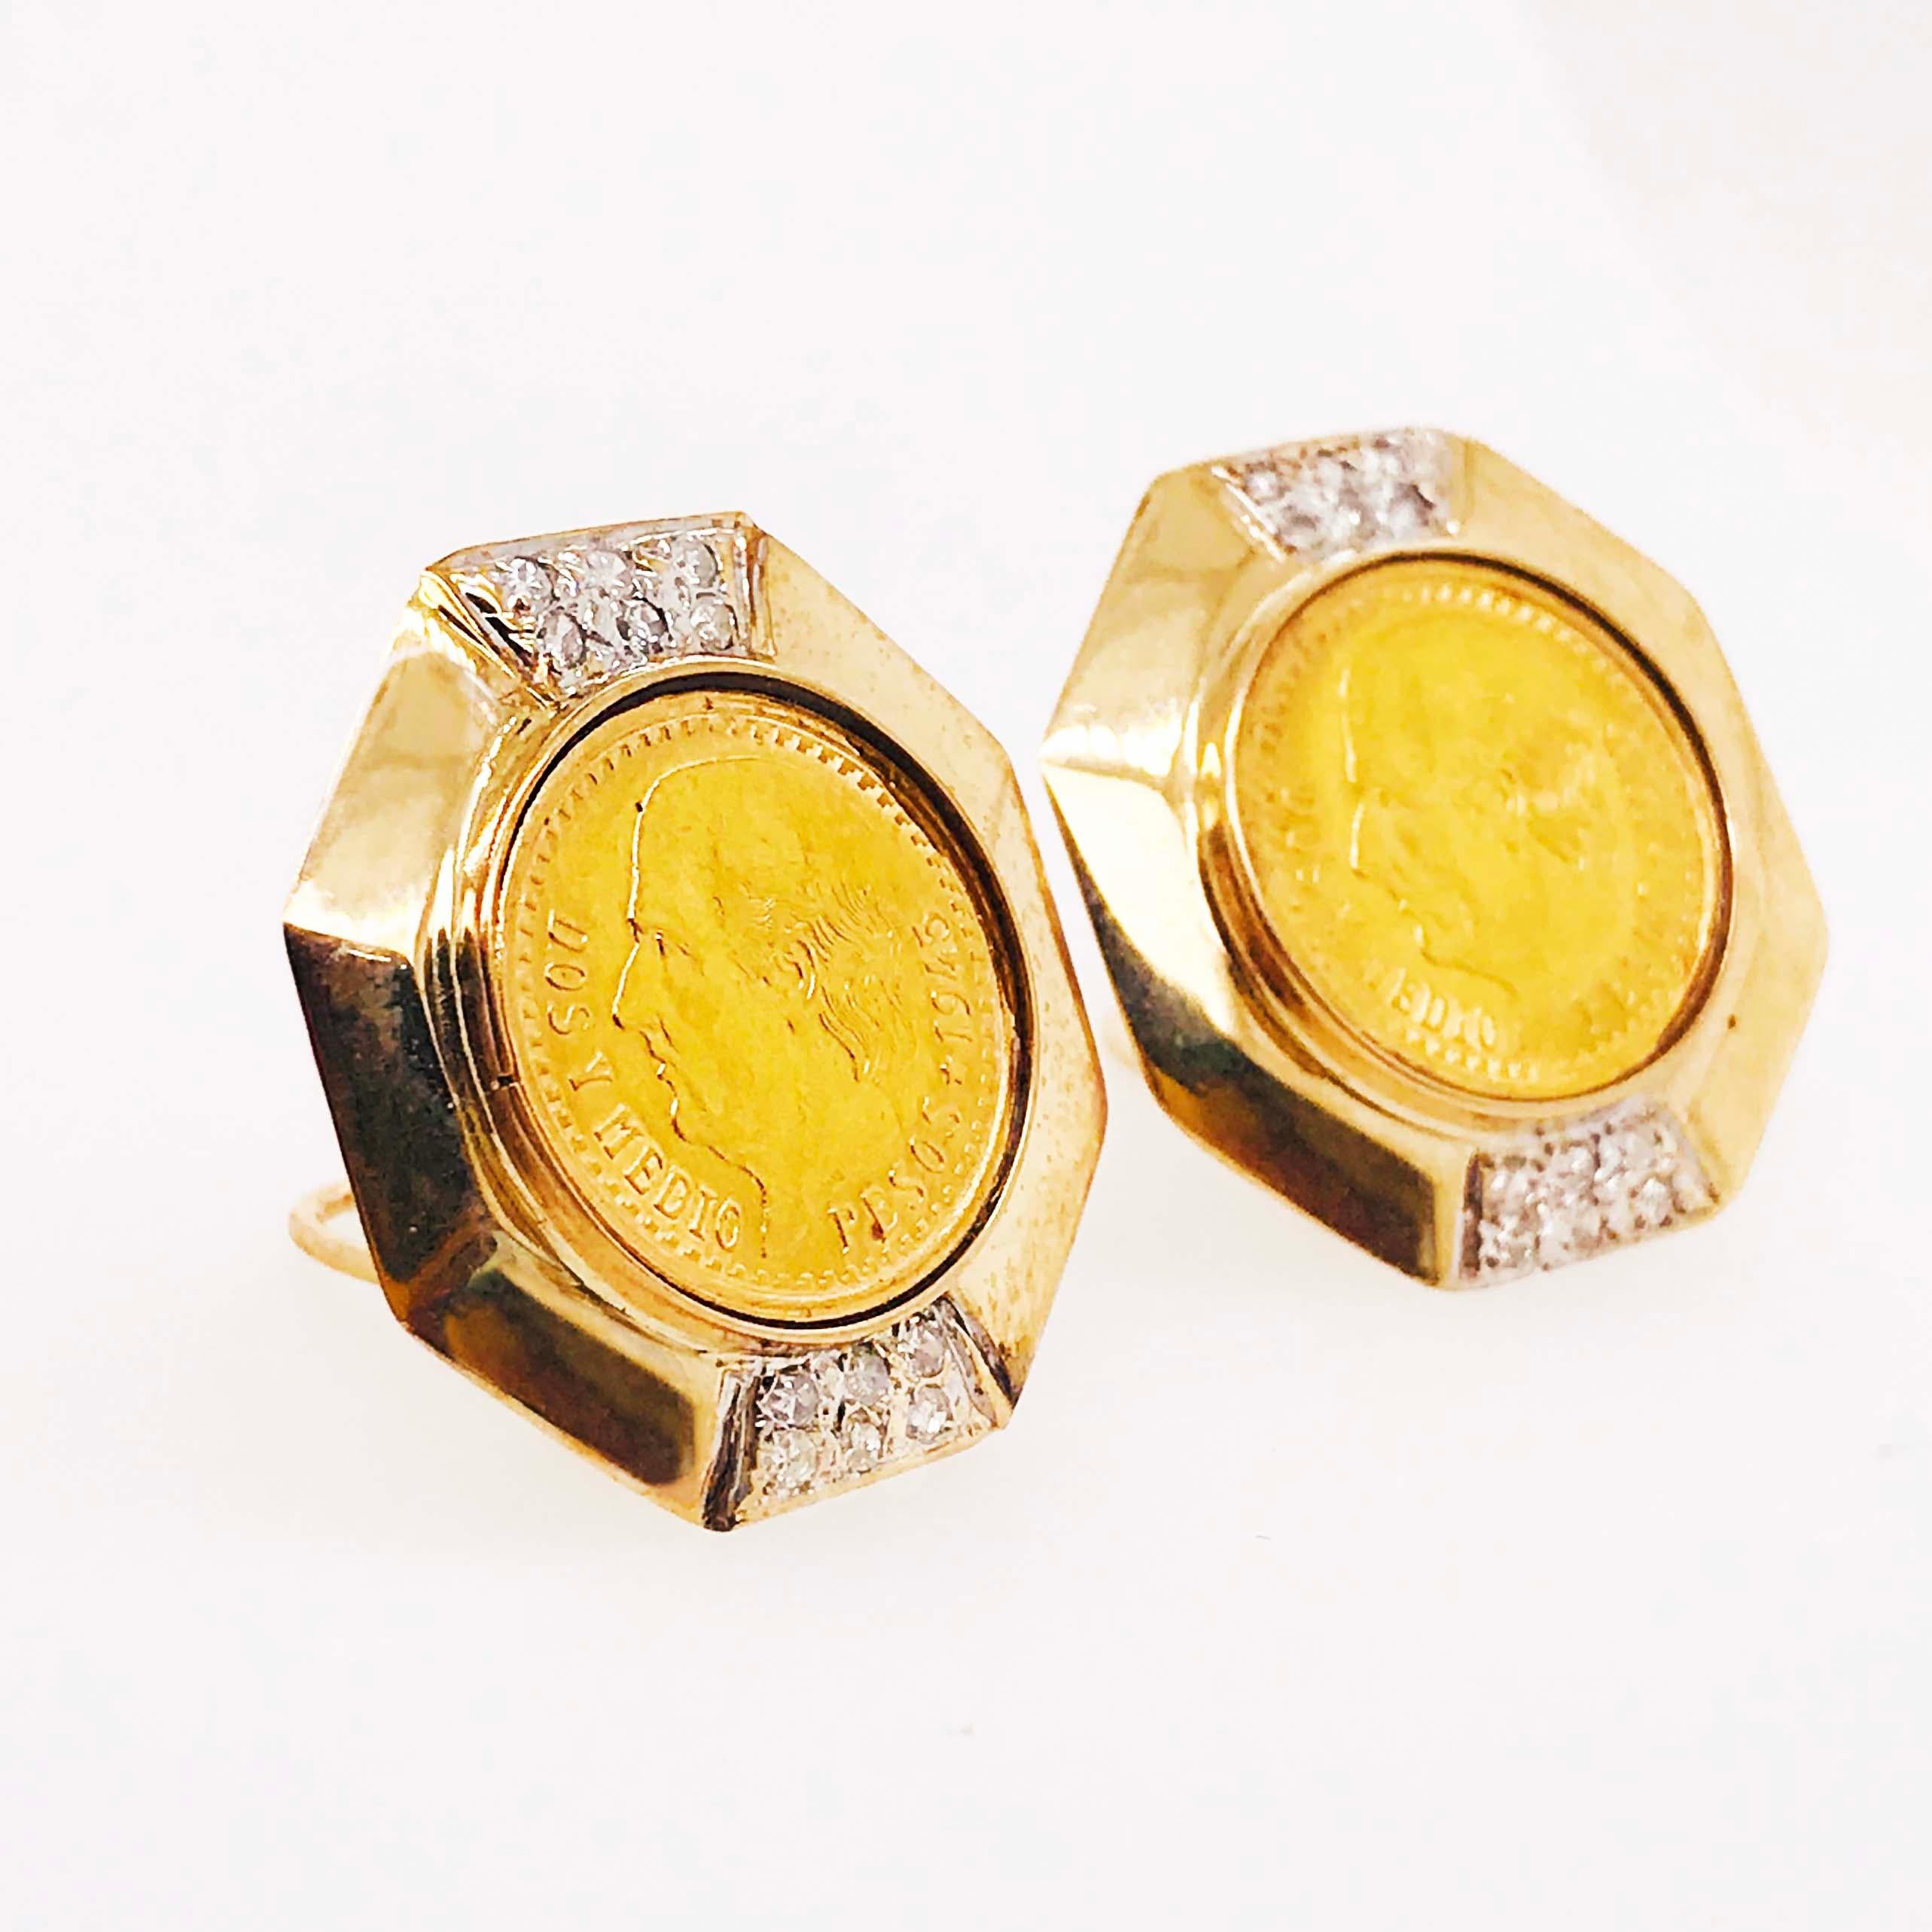 These authentic Mexico coin earrings have an original Mexico Dos Y Medio Peso coin set in a 14k yellow gold diamond coin bezel on each earring.  The bezels are an octagon shape with the top and bottom paved with round diamonds! The diamonds are set